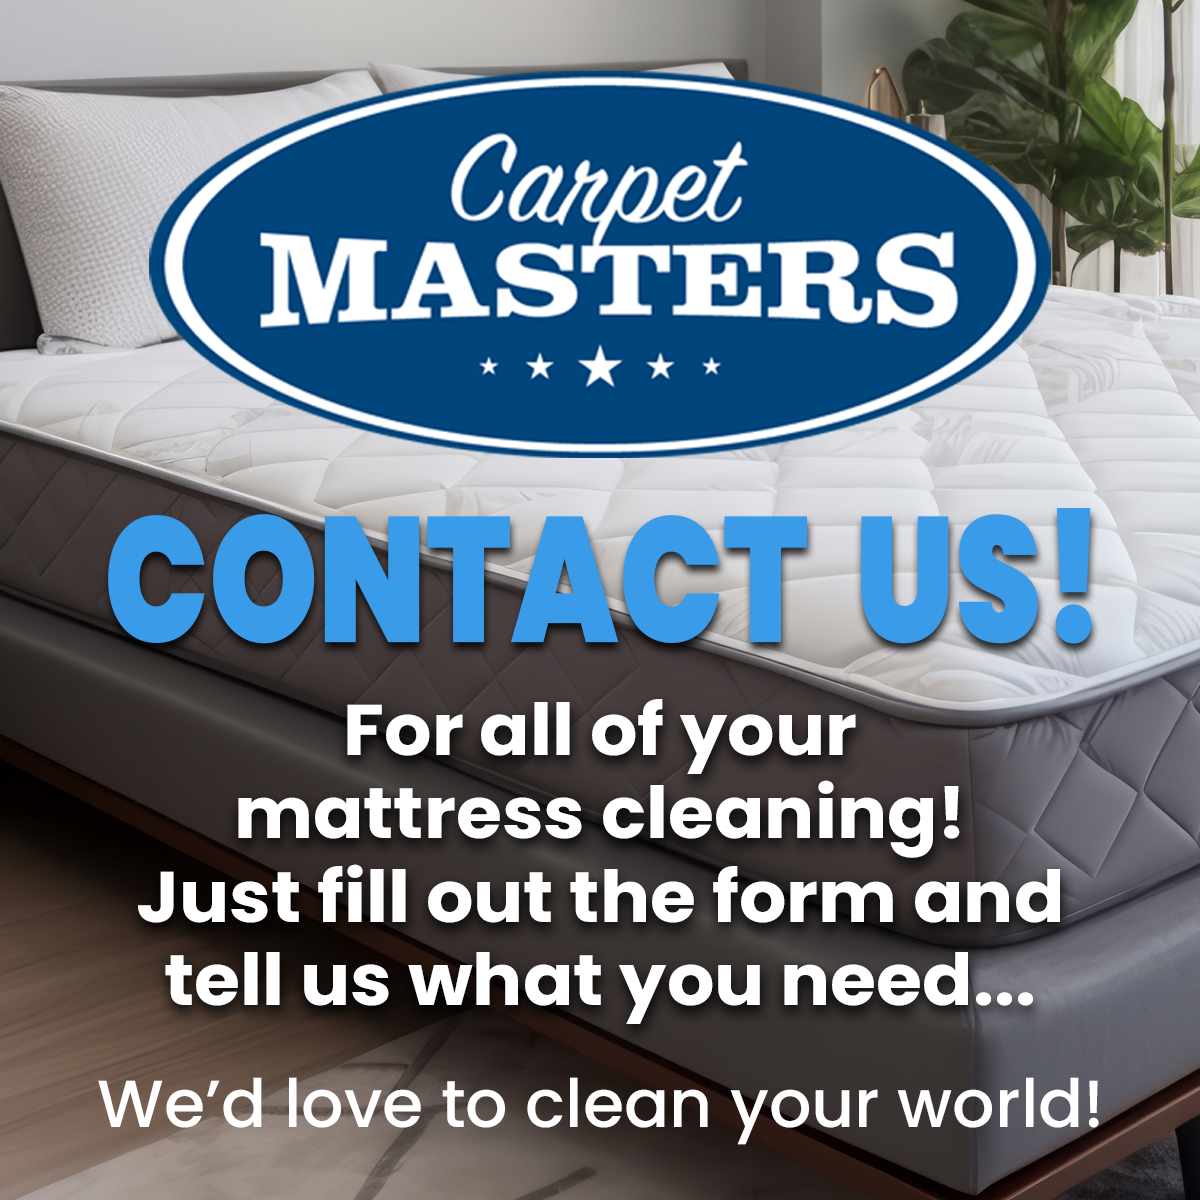 Contact Us for all of your mattress cleaning! Just tell us what you need...